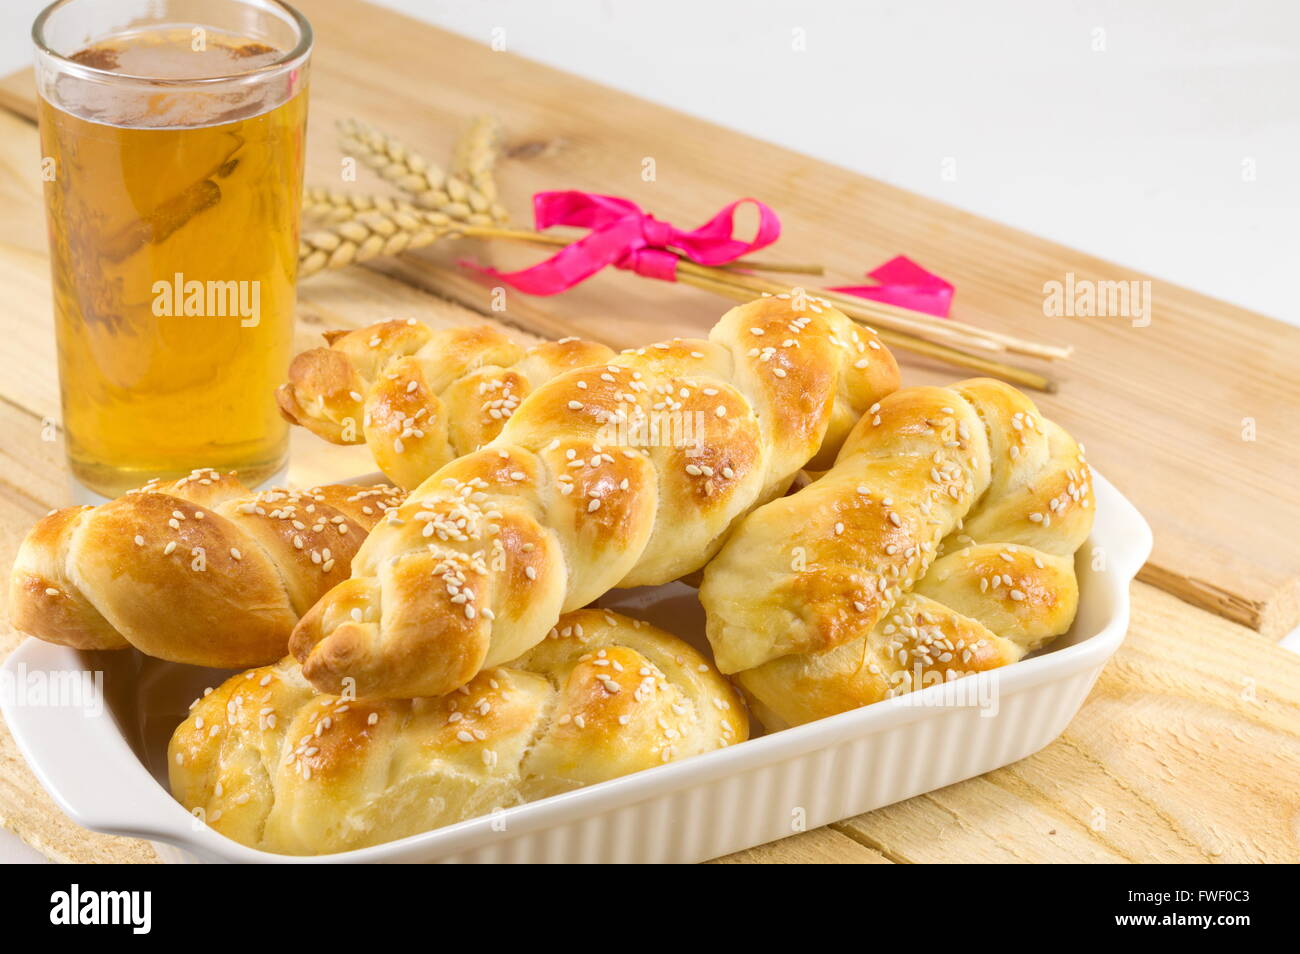 Homemade braid pastry on a plate and glass of beer Stock Photo